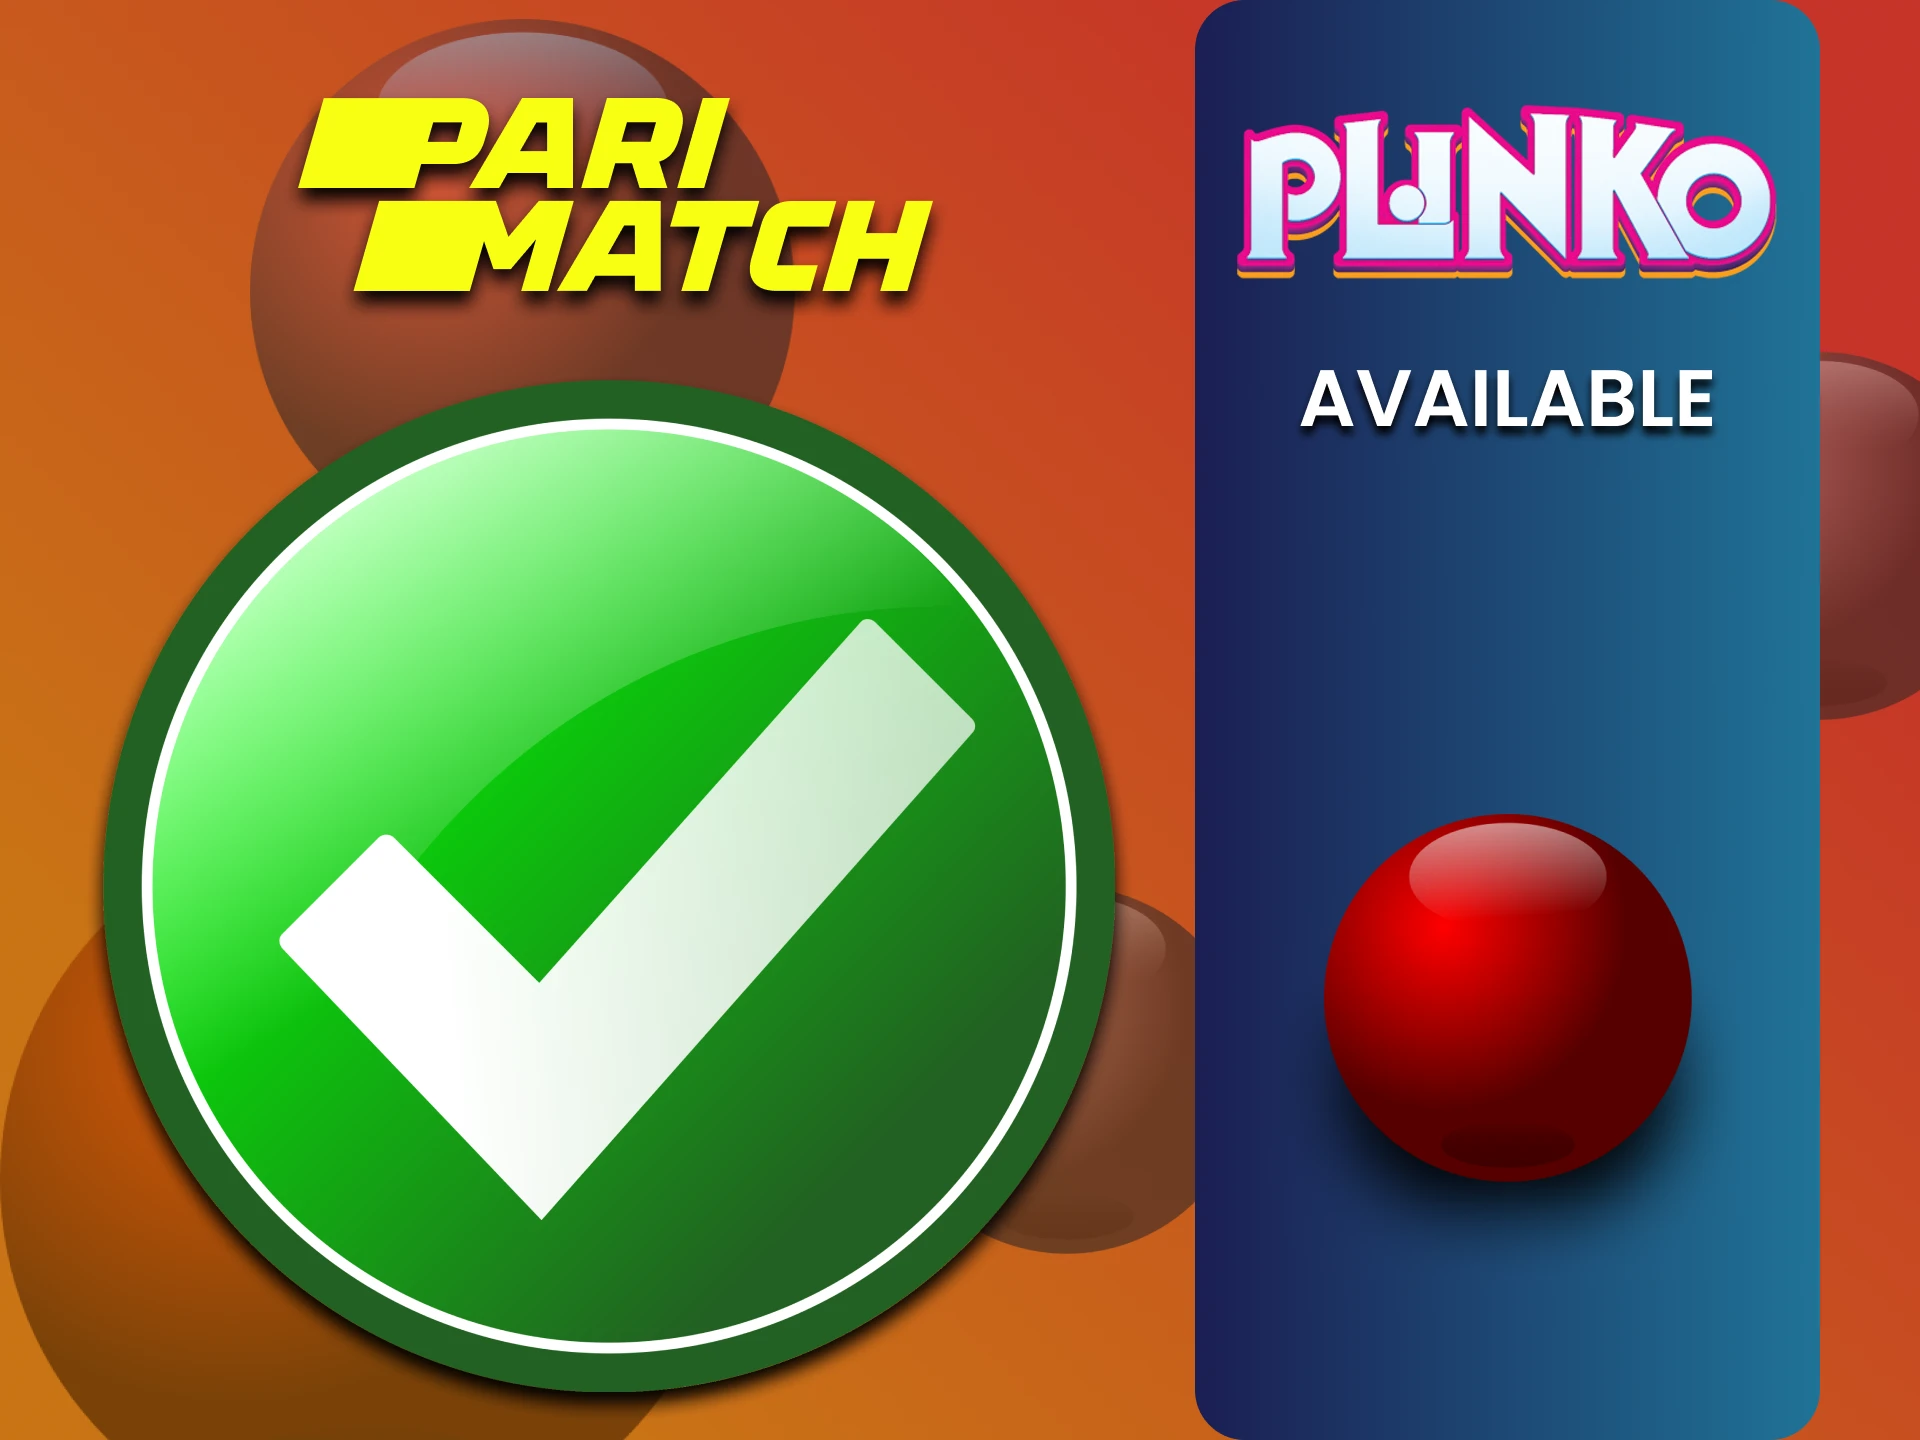 Find out which providers offer Plinko on Parimatch.